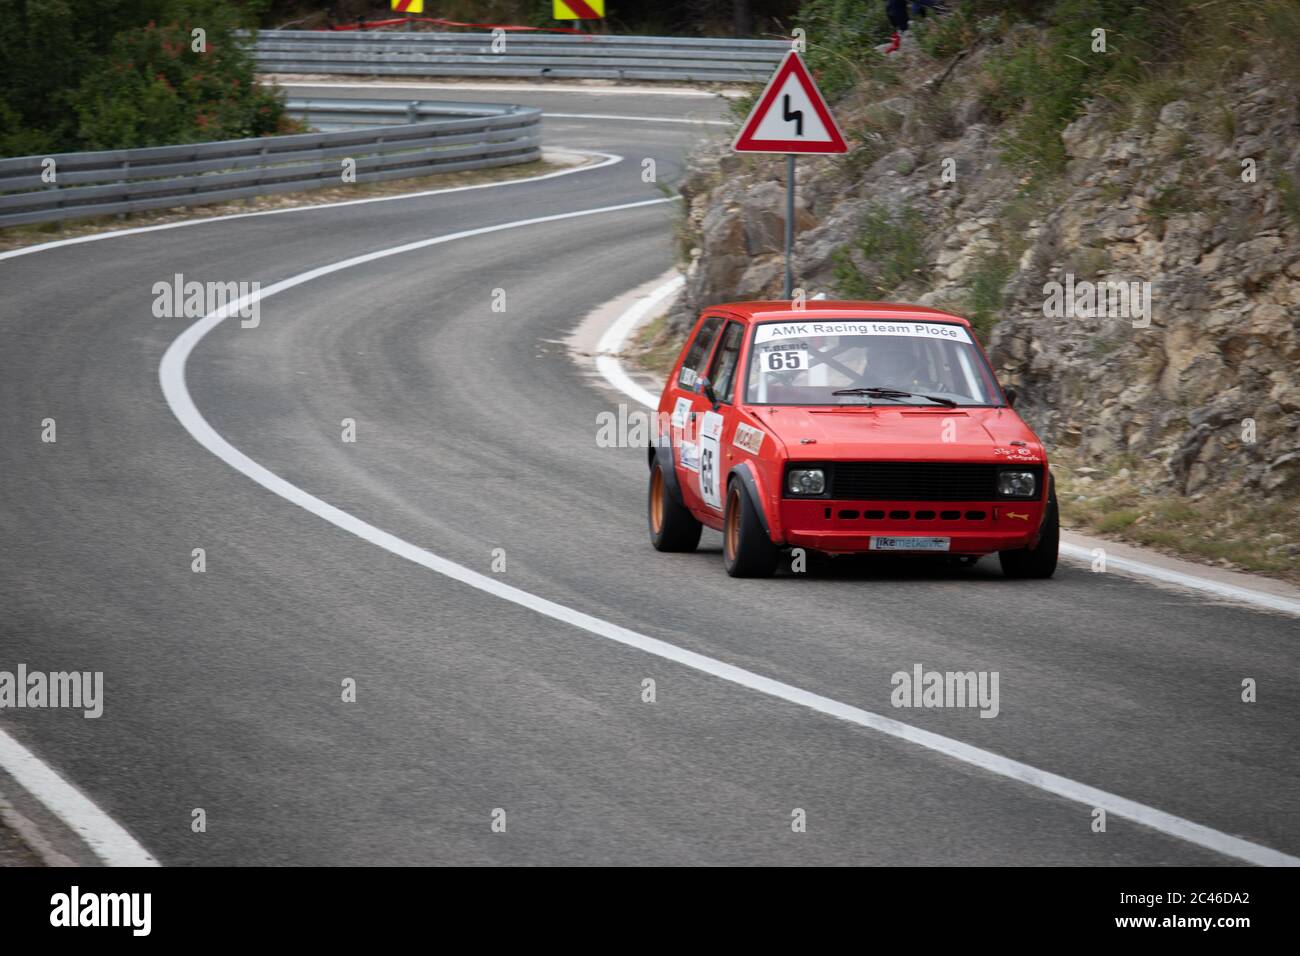 Skradin Croatia, June 2020 Simple red old Yugoslavian 'Yugo' modified for hill climb racing up hill, going through a bend at high speed Stock Photo